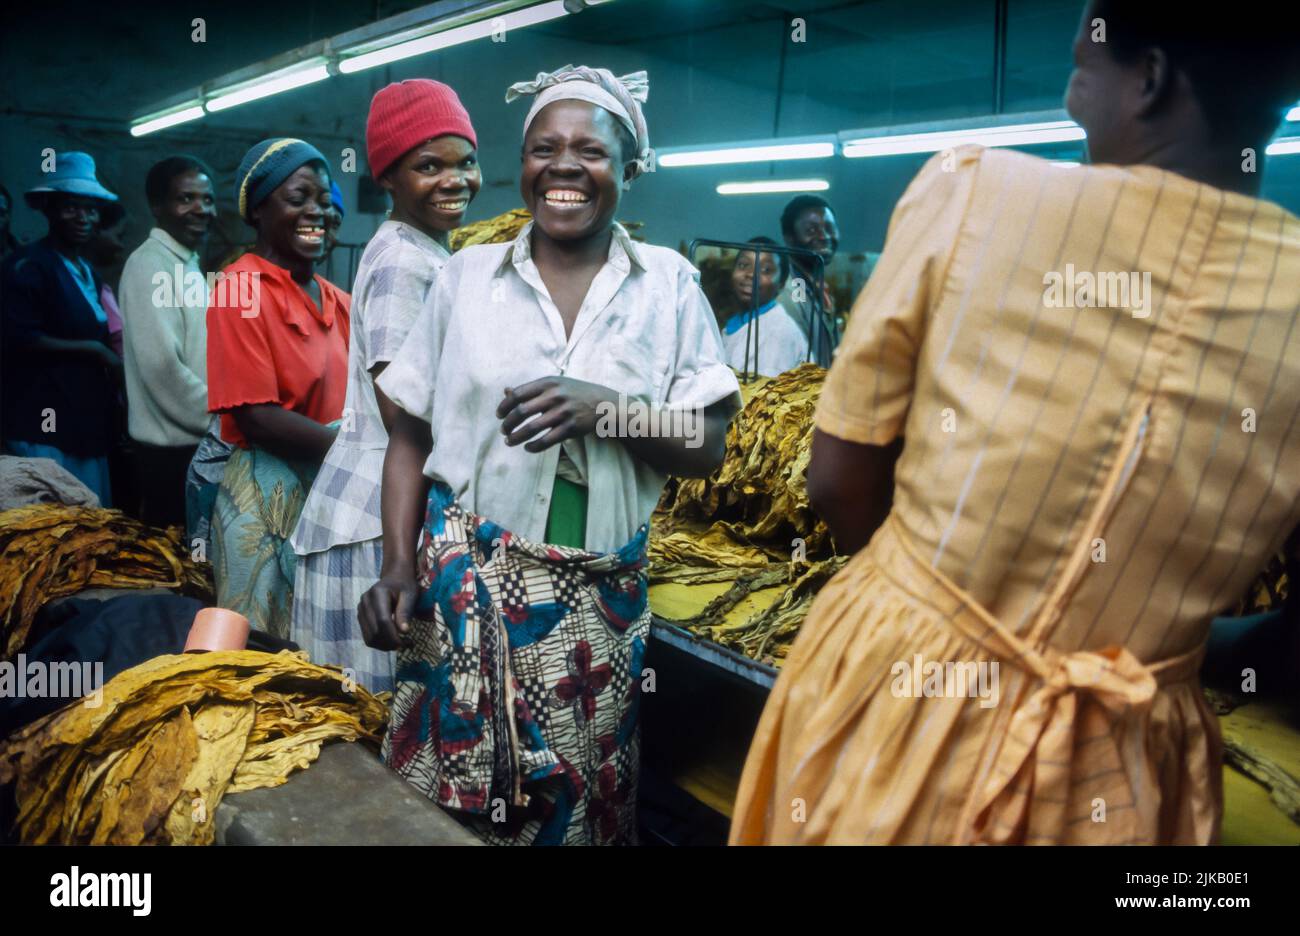 Smiling workers on a production line in a tobacco factory in Zimbabwe. Stock Photo